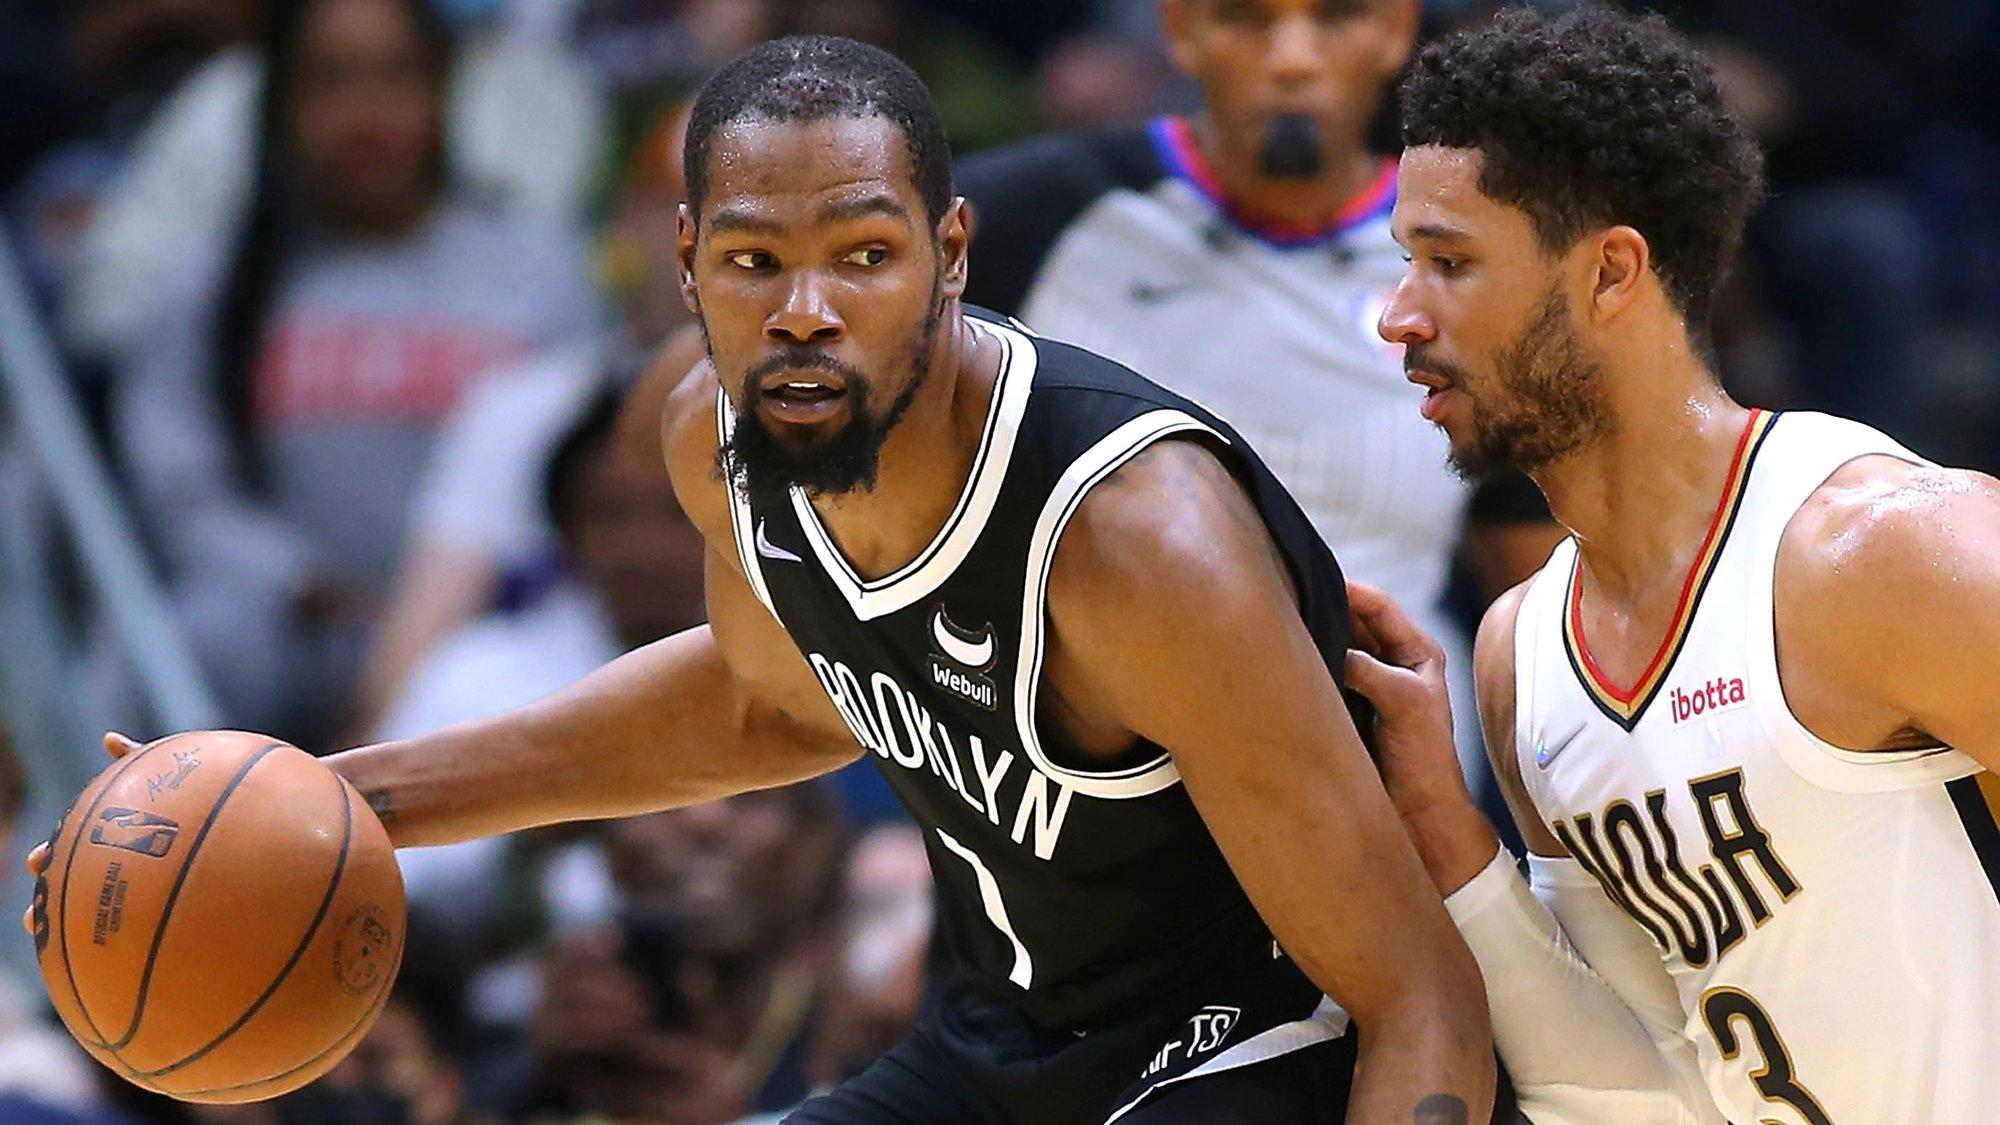 NBA Preview, Odds & Best Bets for Monday, November 22: Suns Seek 13th Straight Win; Durant Returns for Nets With East’s Top Three All in Action